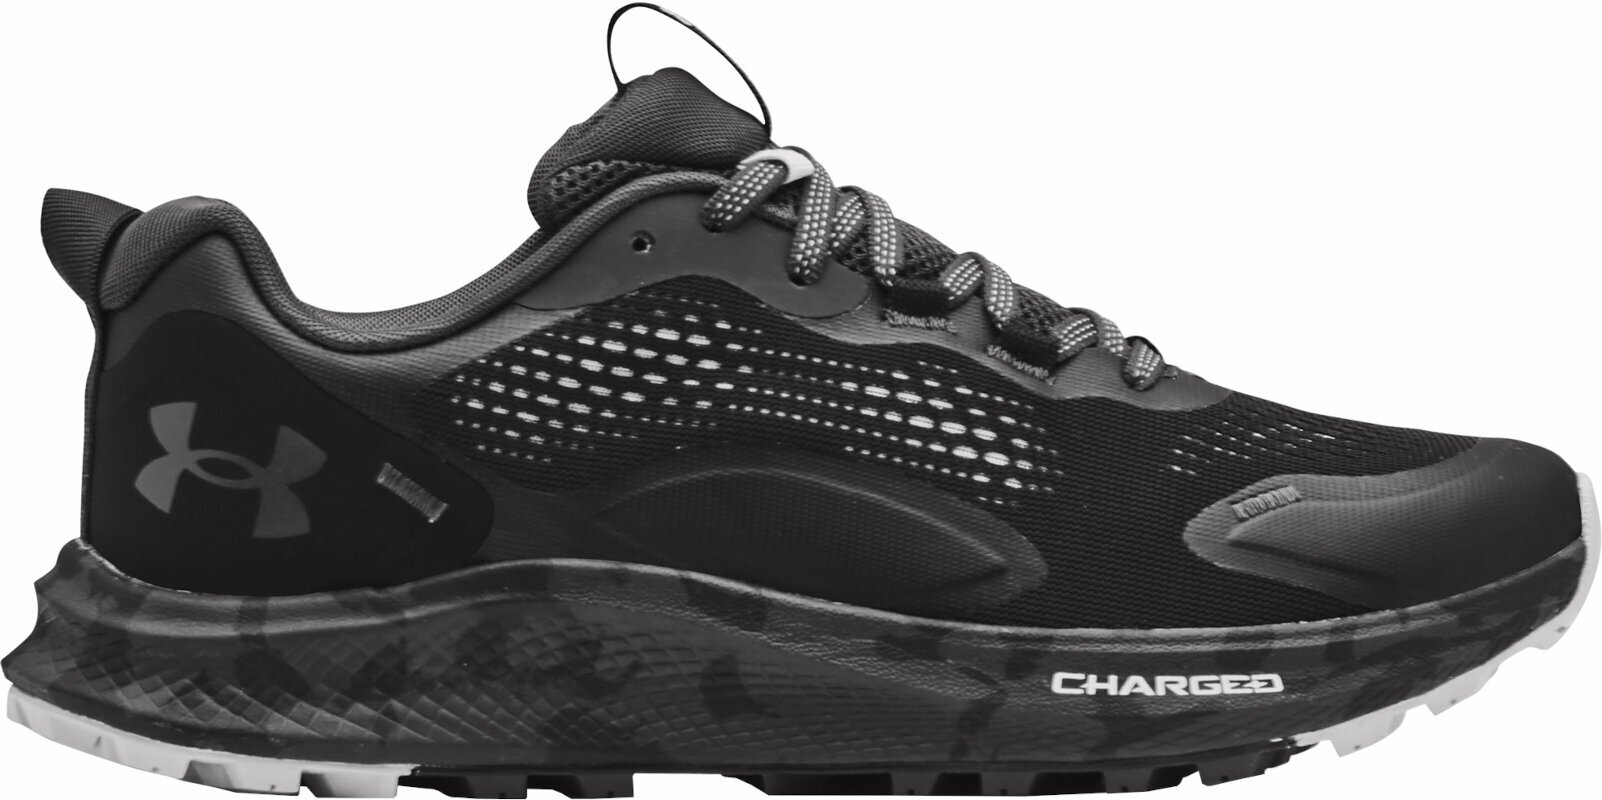 Chaussures de trail running
 Under Armour Women's UA Charged Bandit Trail 2 Running Shoes Black/Jet Gray 36 Chaussures de trail running